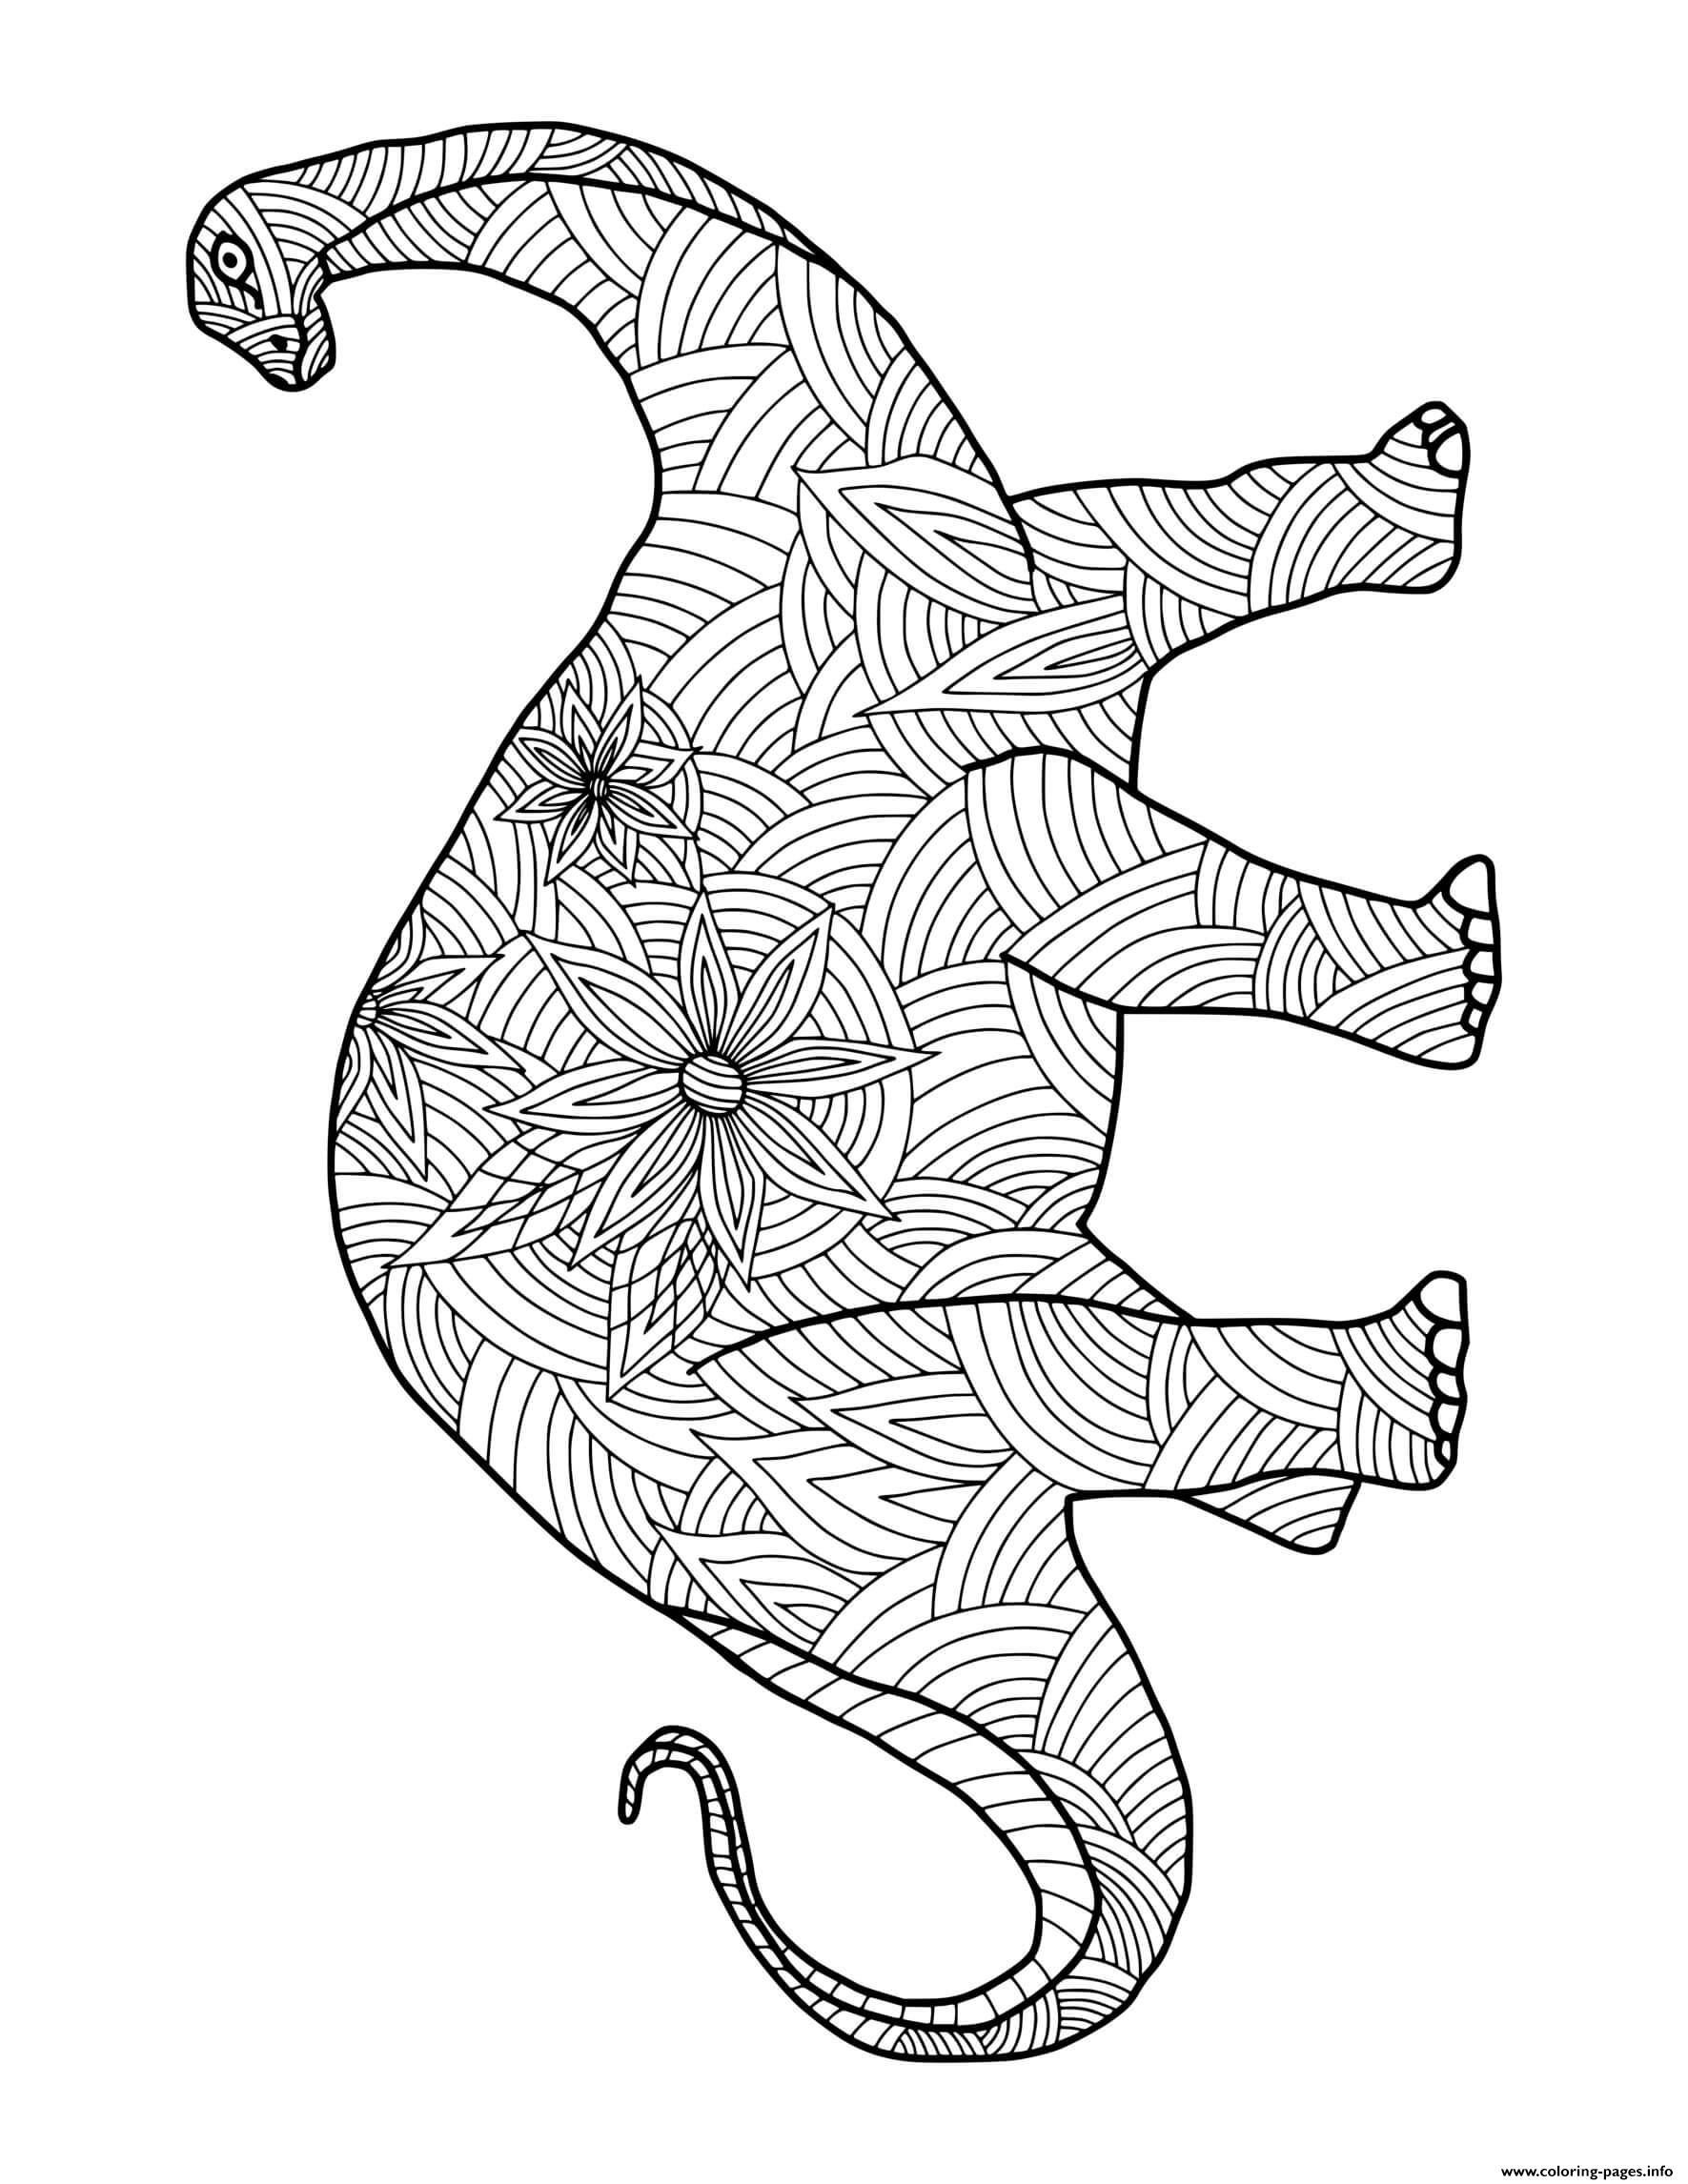 Dinosaur Large Dinosaur Doodle For Adults coloring